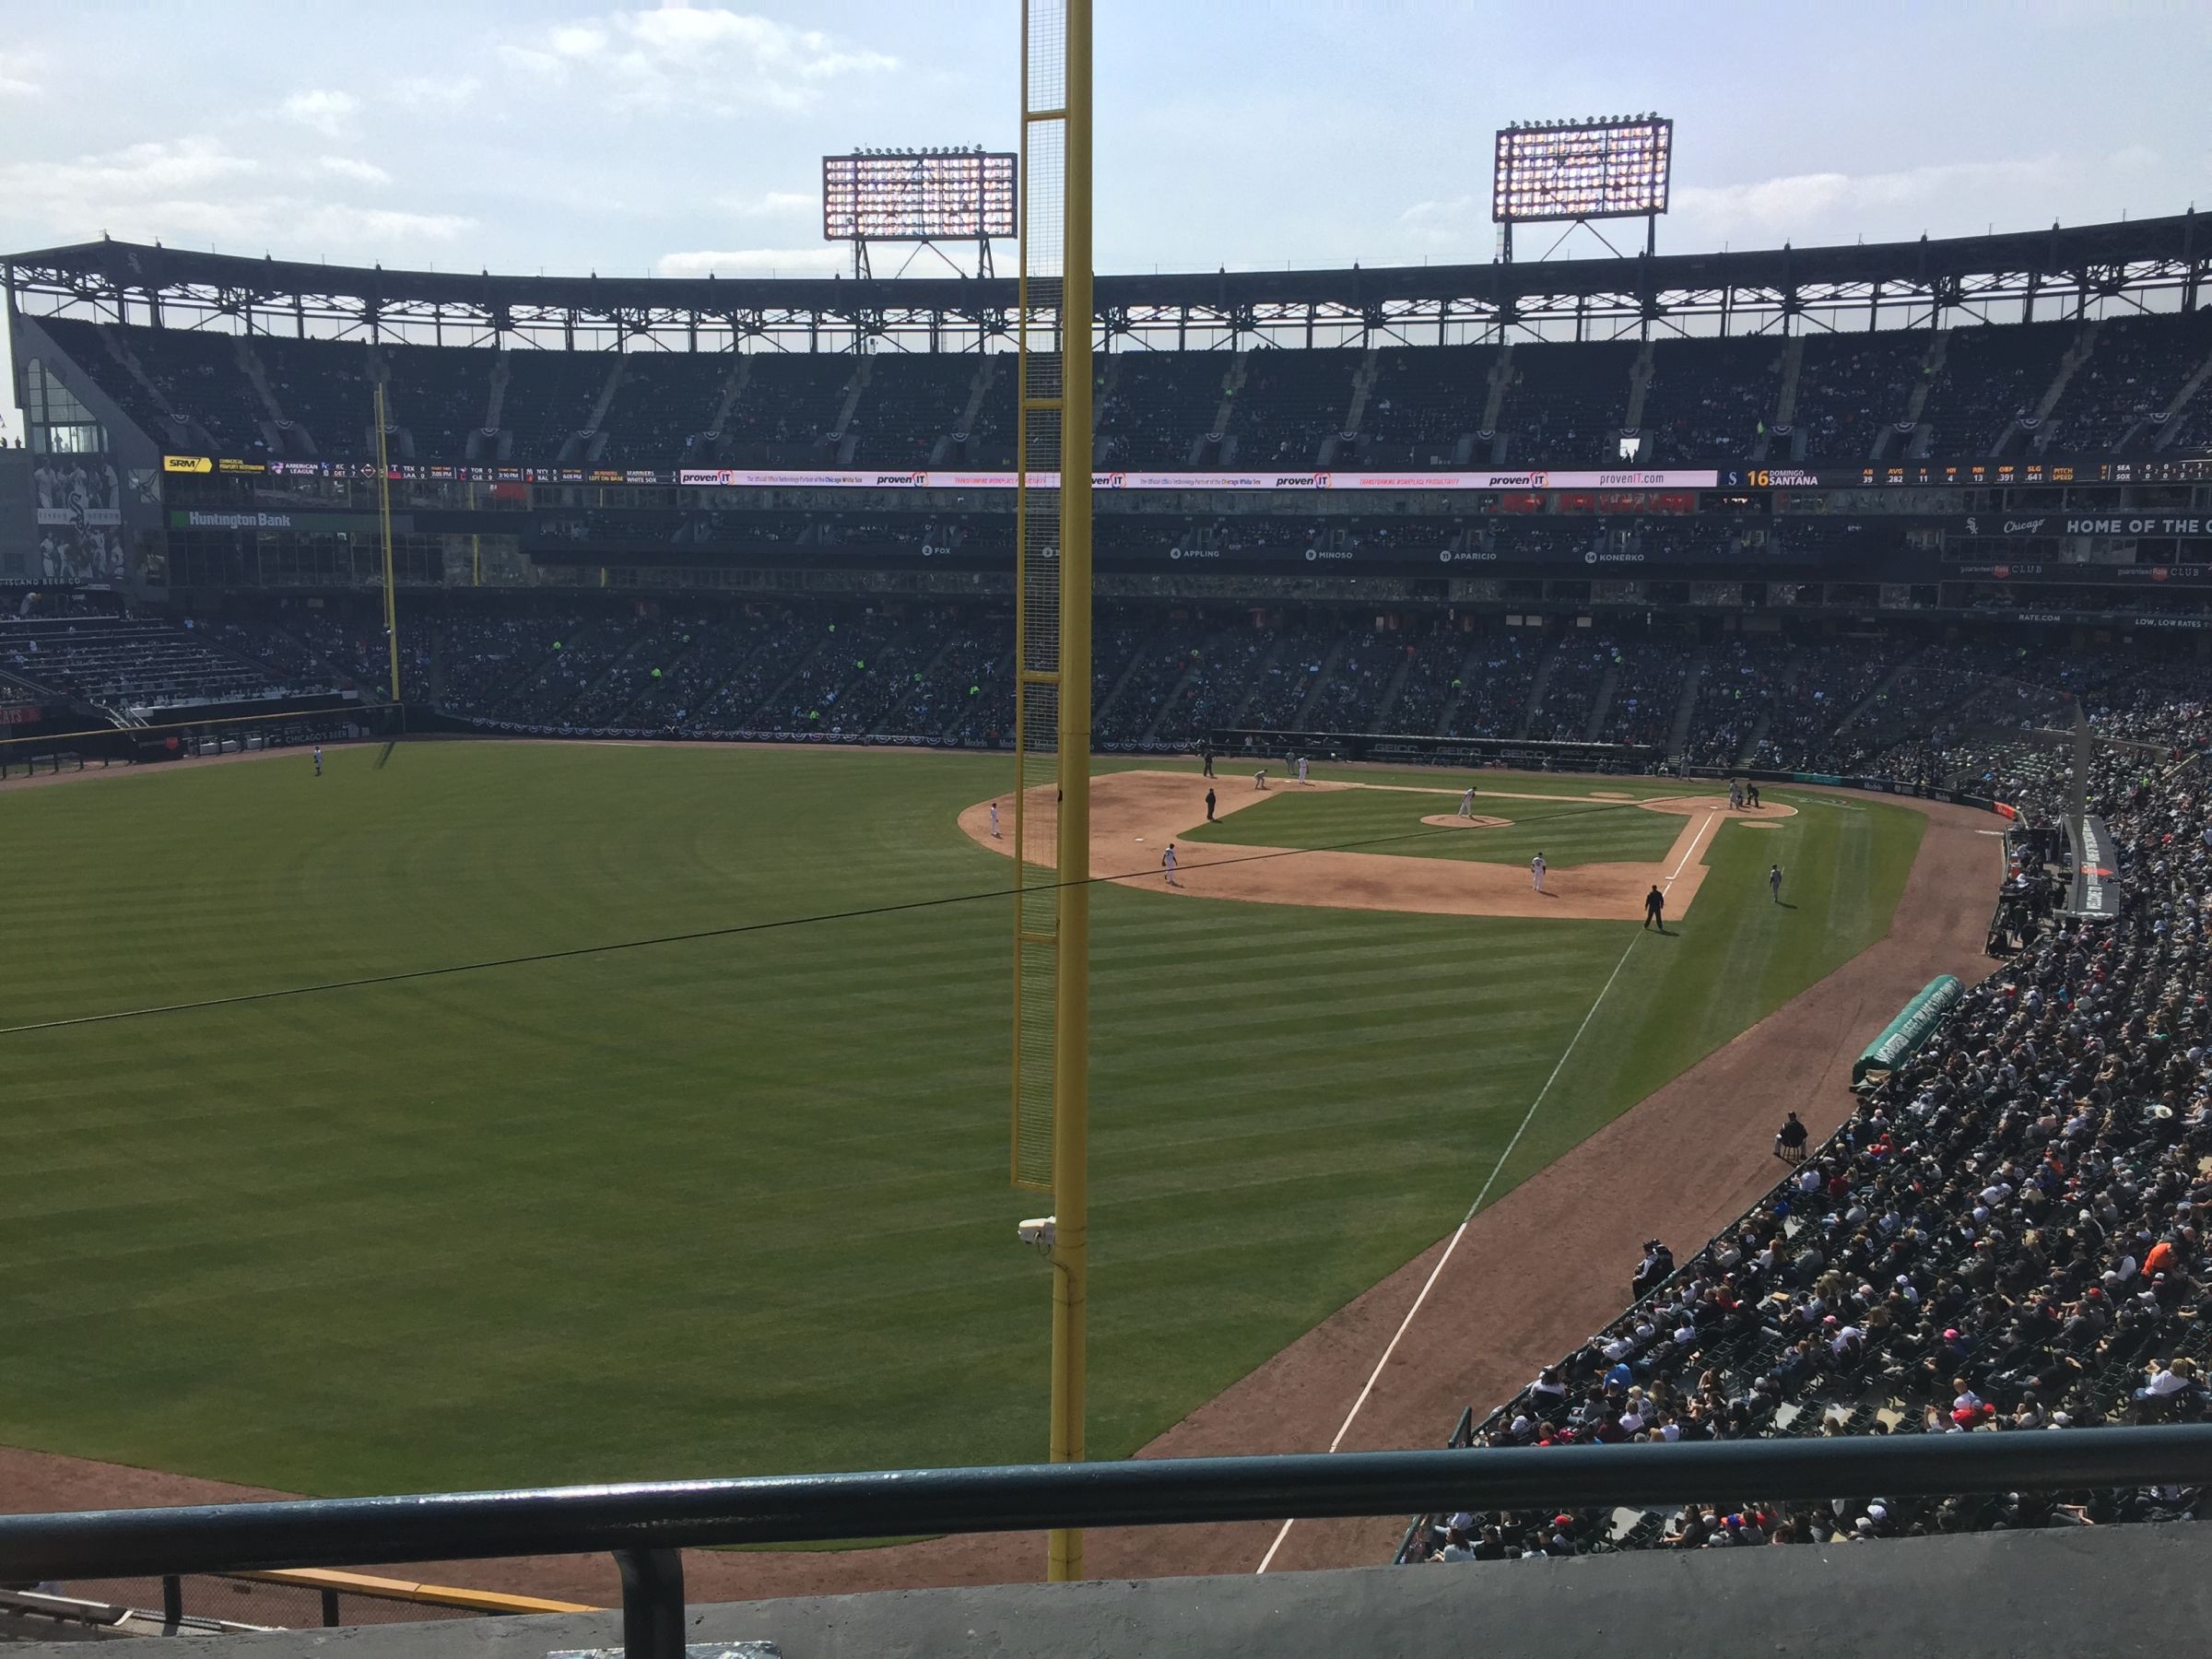 section 356, row 2 seat view  - guaranteed rate field